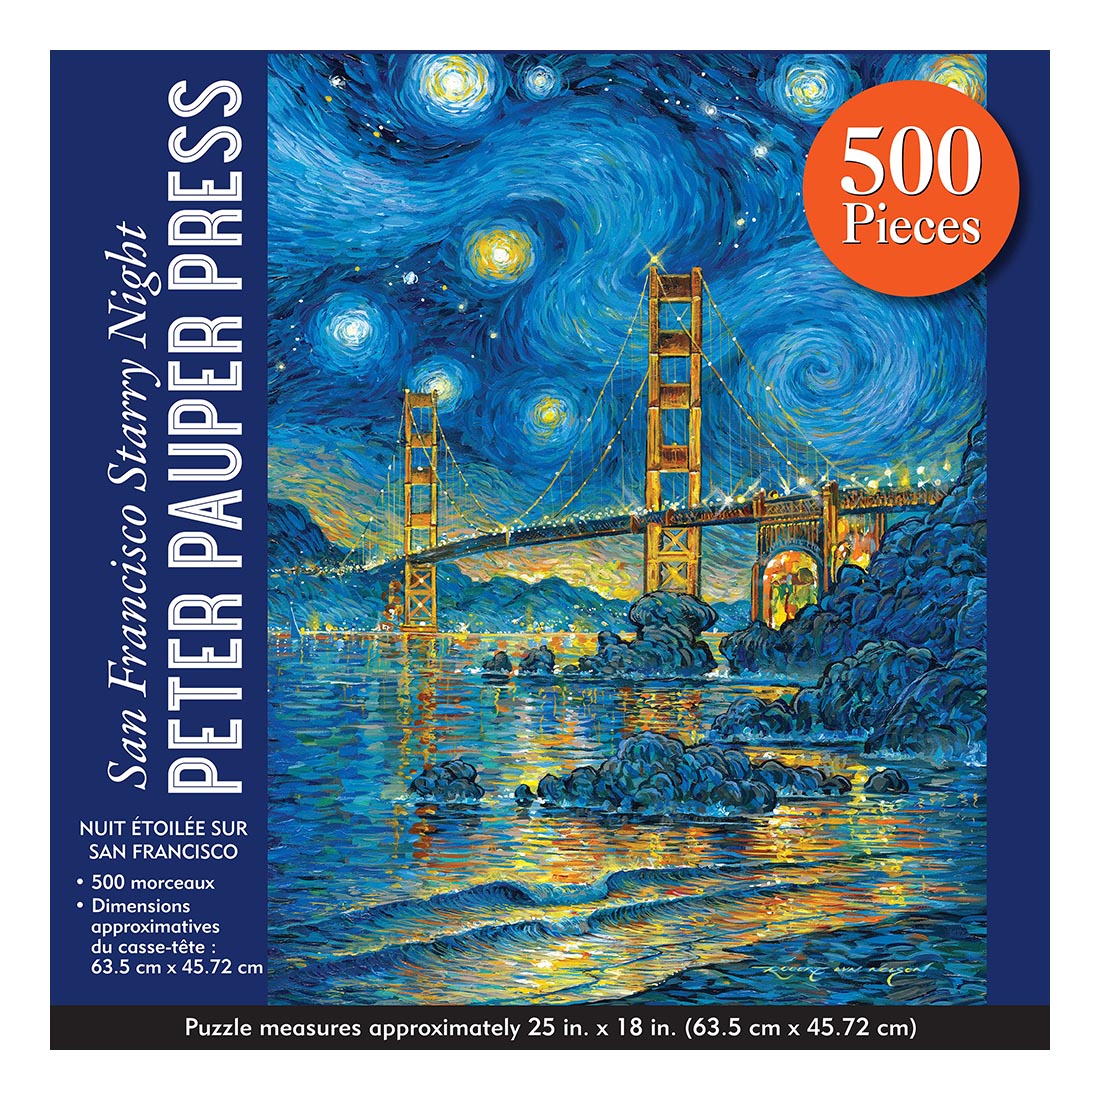 San Francisco Starry Night Puzzle